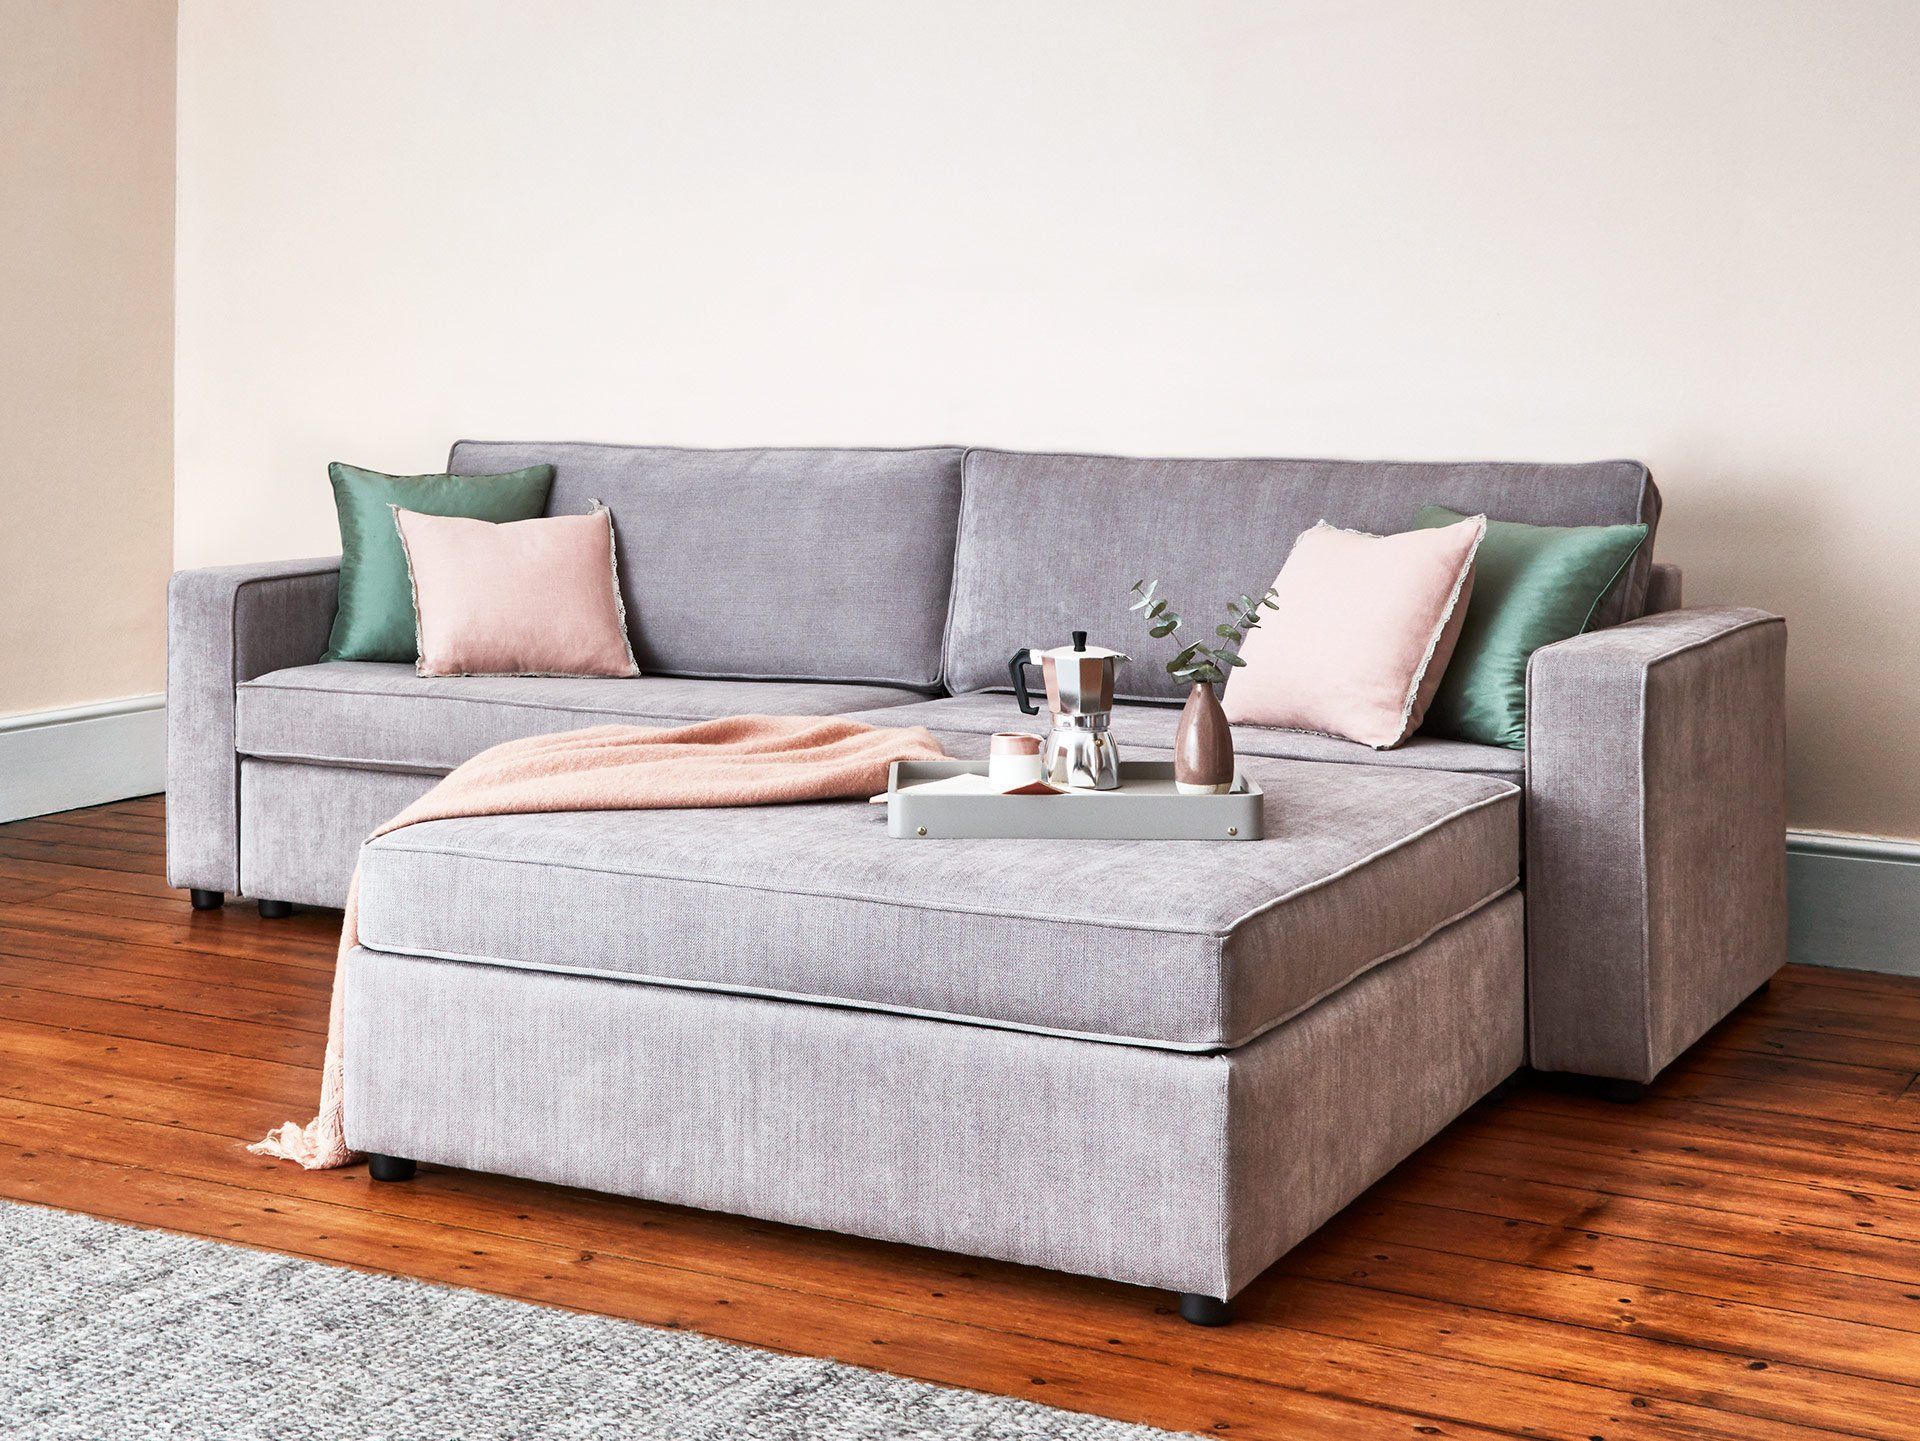 The Westbury 2 Modules Sofa Bed With Ottoman | Modular Sofa Bed Within Sofas With Ottomans (View 7 of 20)